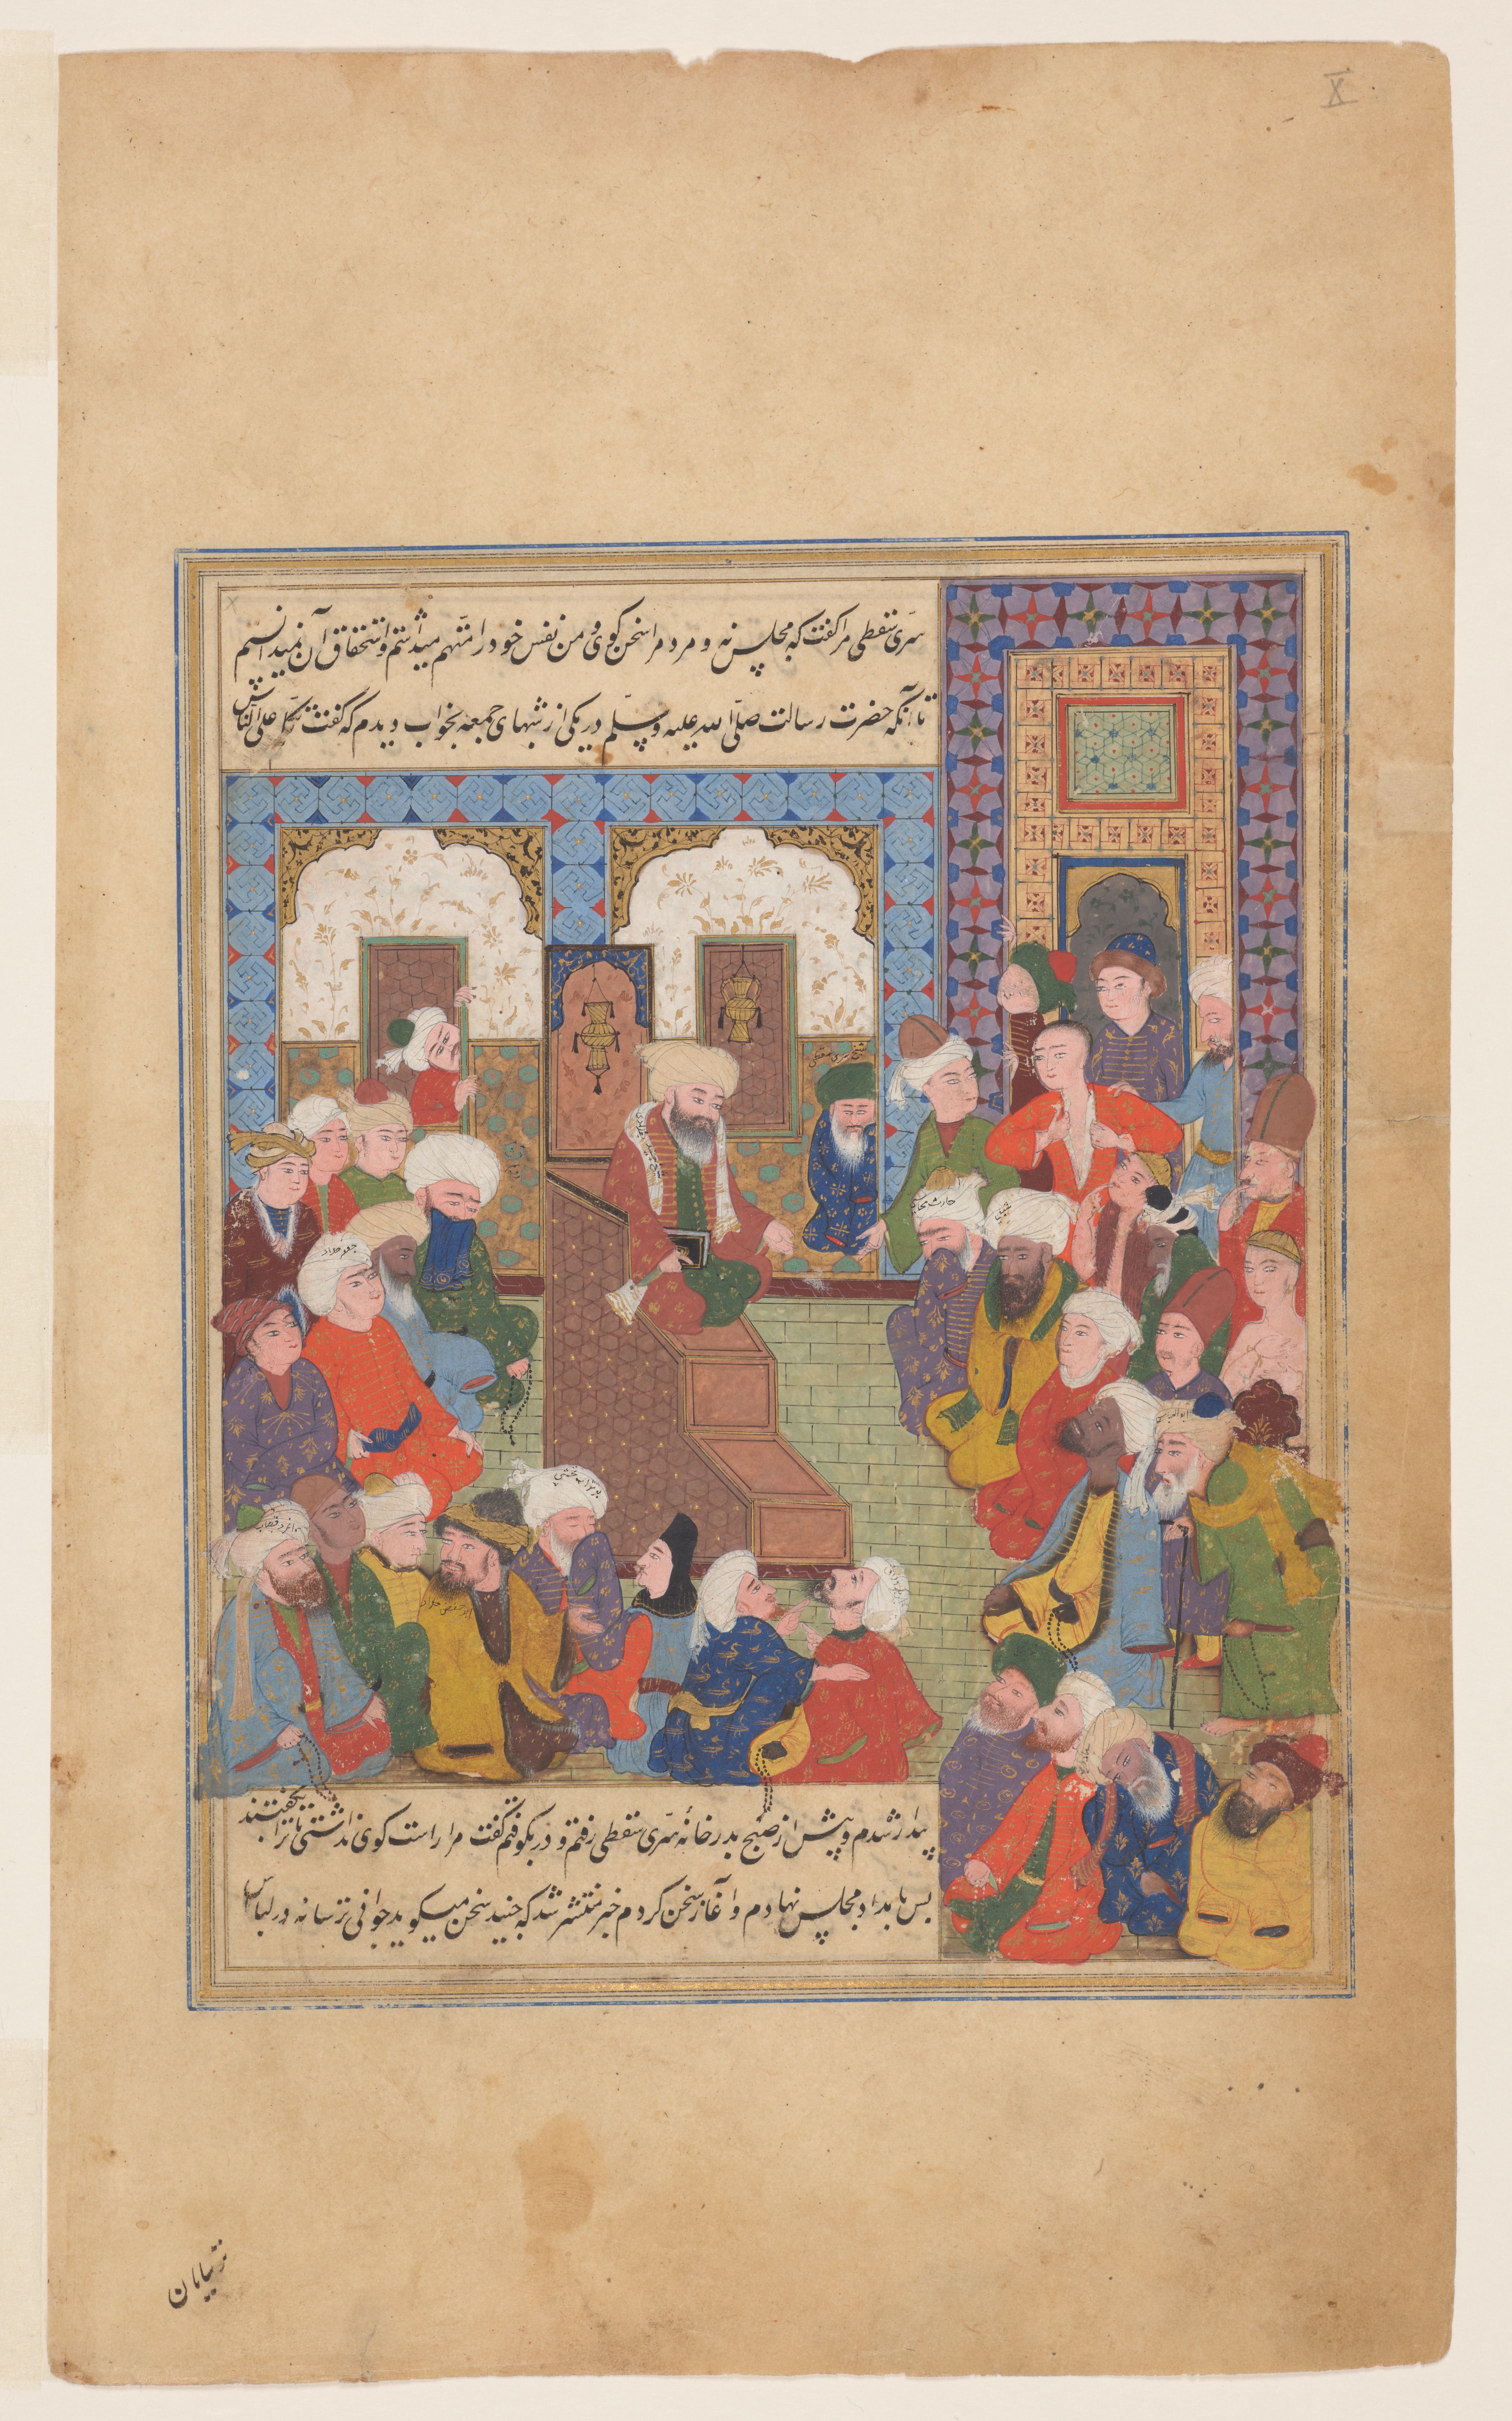 1 Early Sufism And The Origins Of The Halveti Path, C. 900–1400